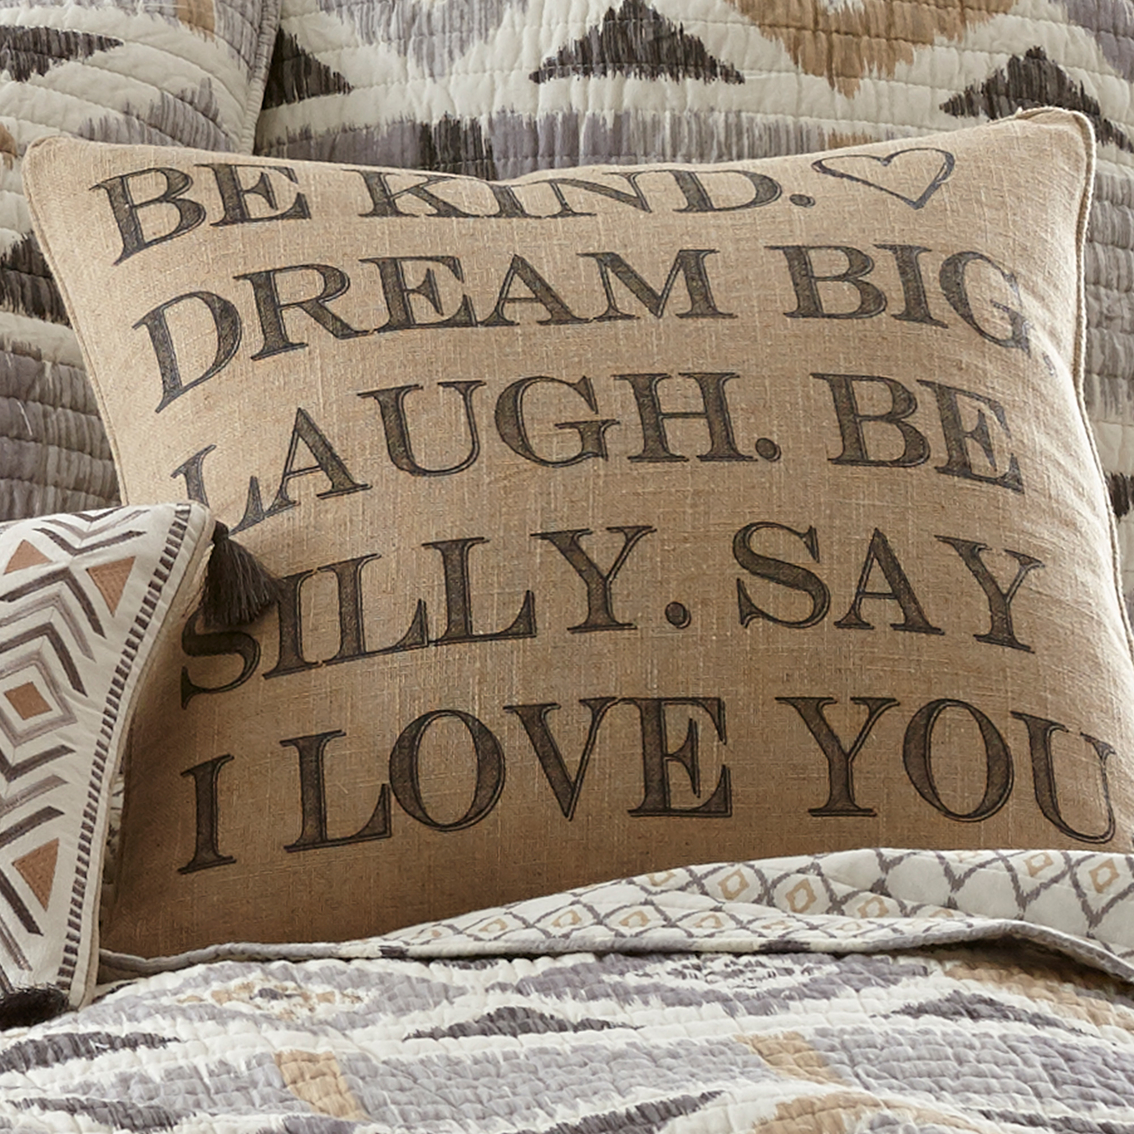 Levtex Home Santa Fe Be Kind Pillow - Image 2 of 3